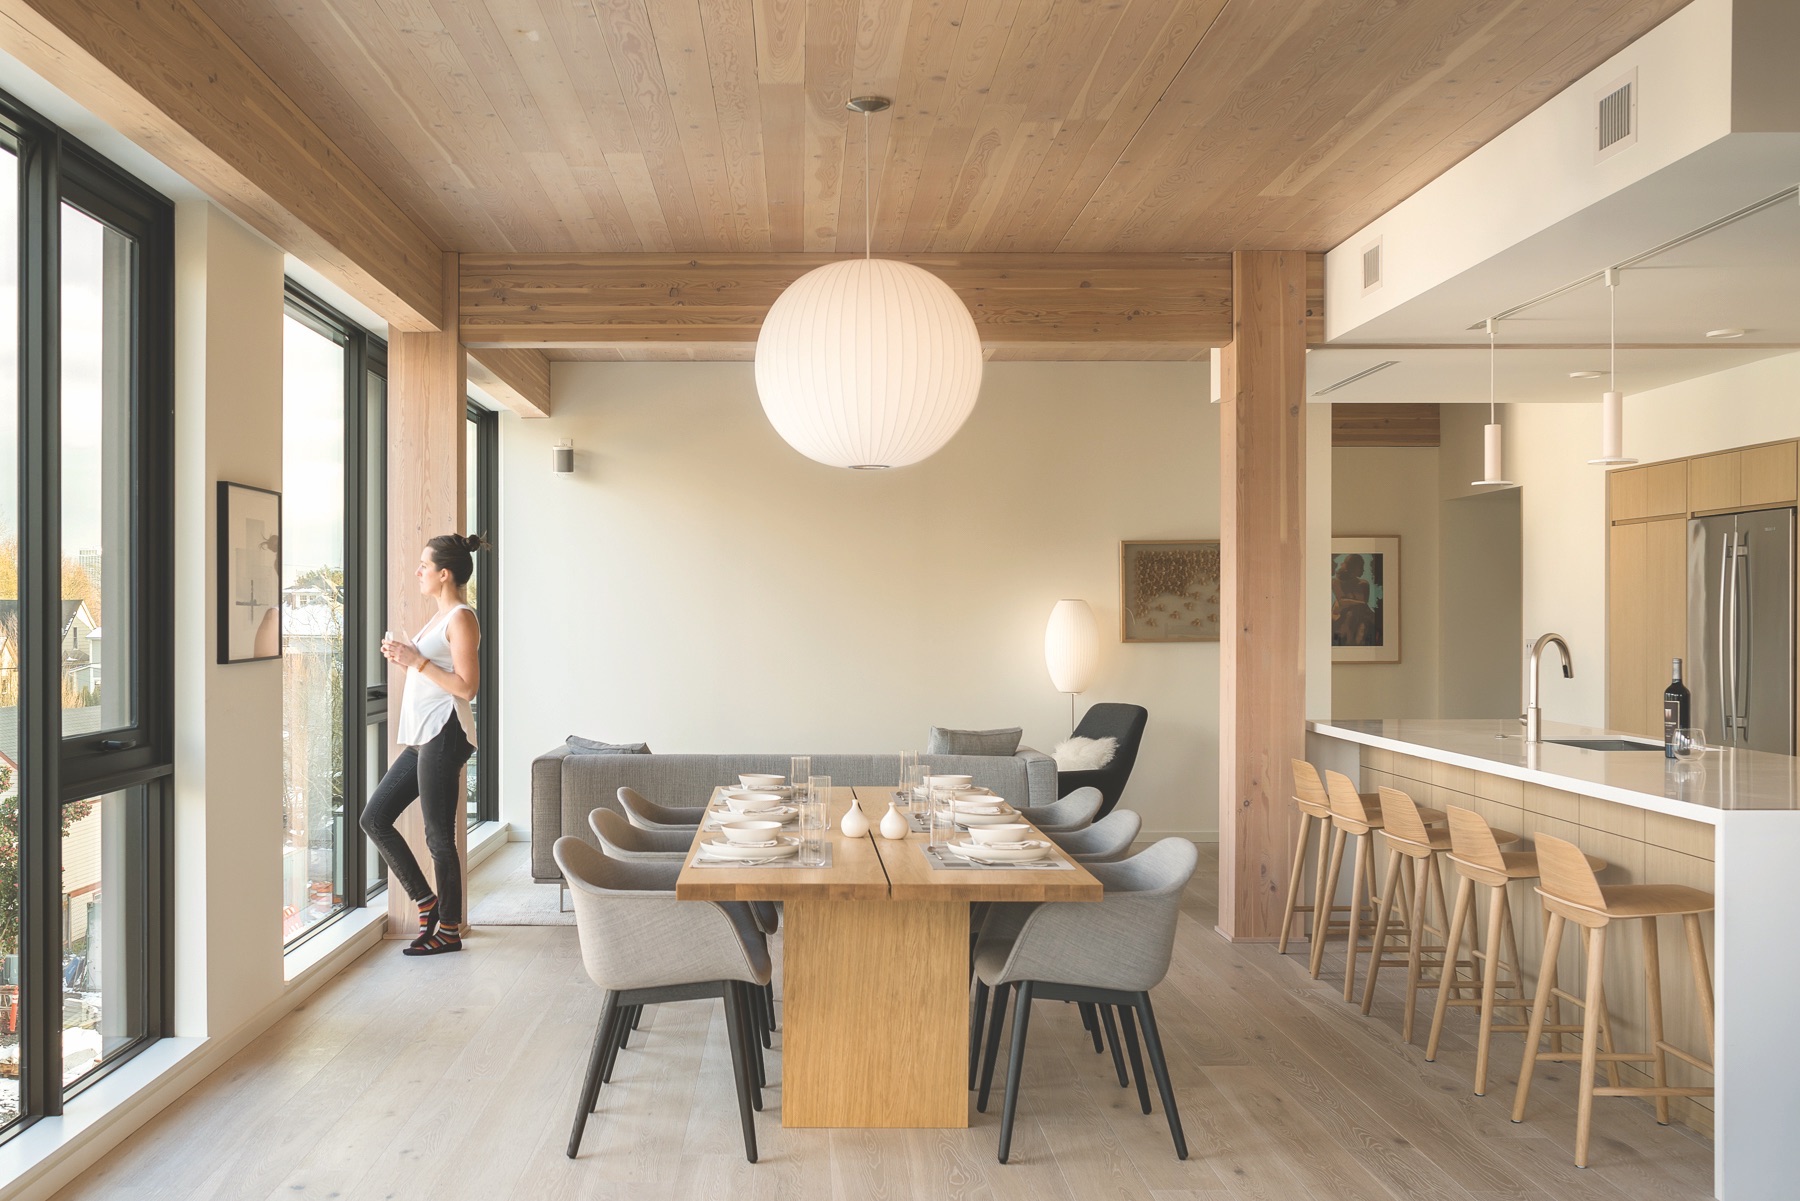 Mass timber for multifamily housing construction - Carbon12 dining room w person.jpeg